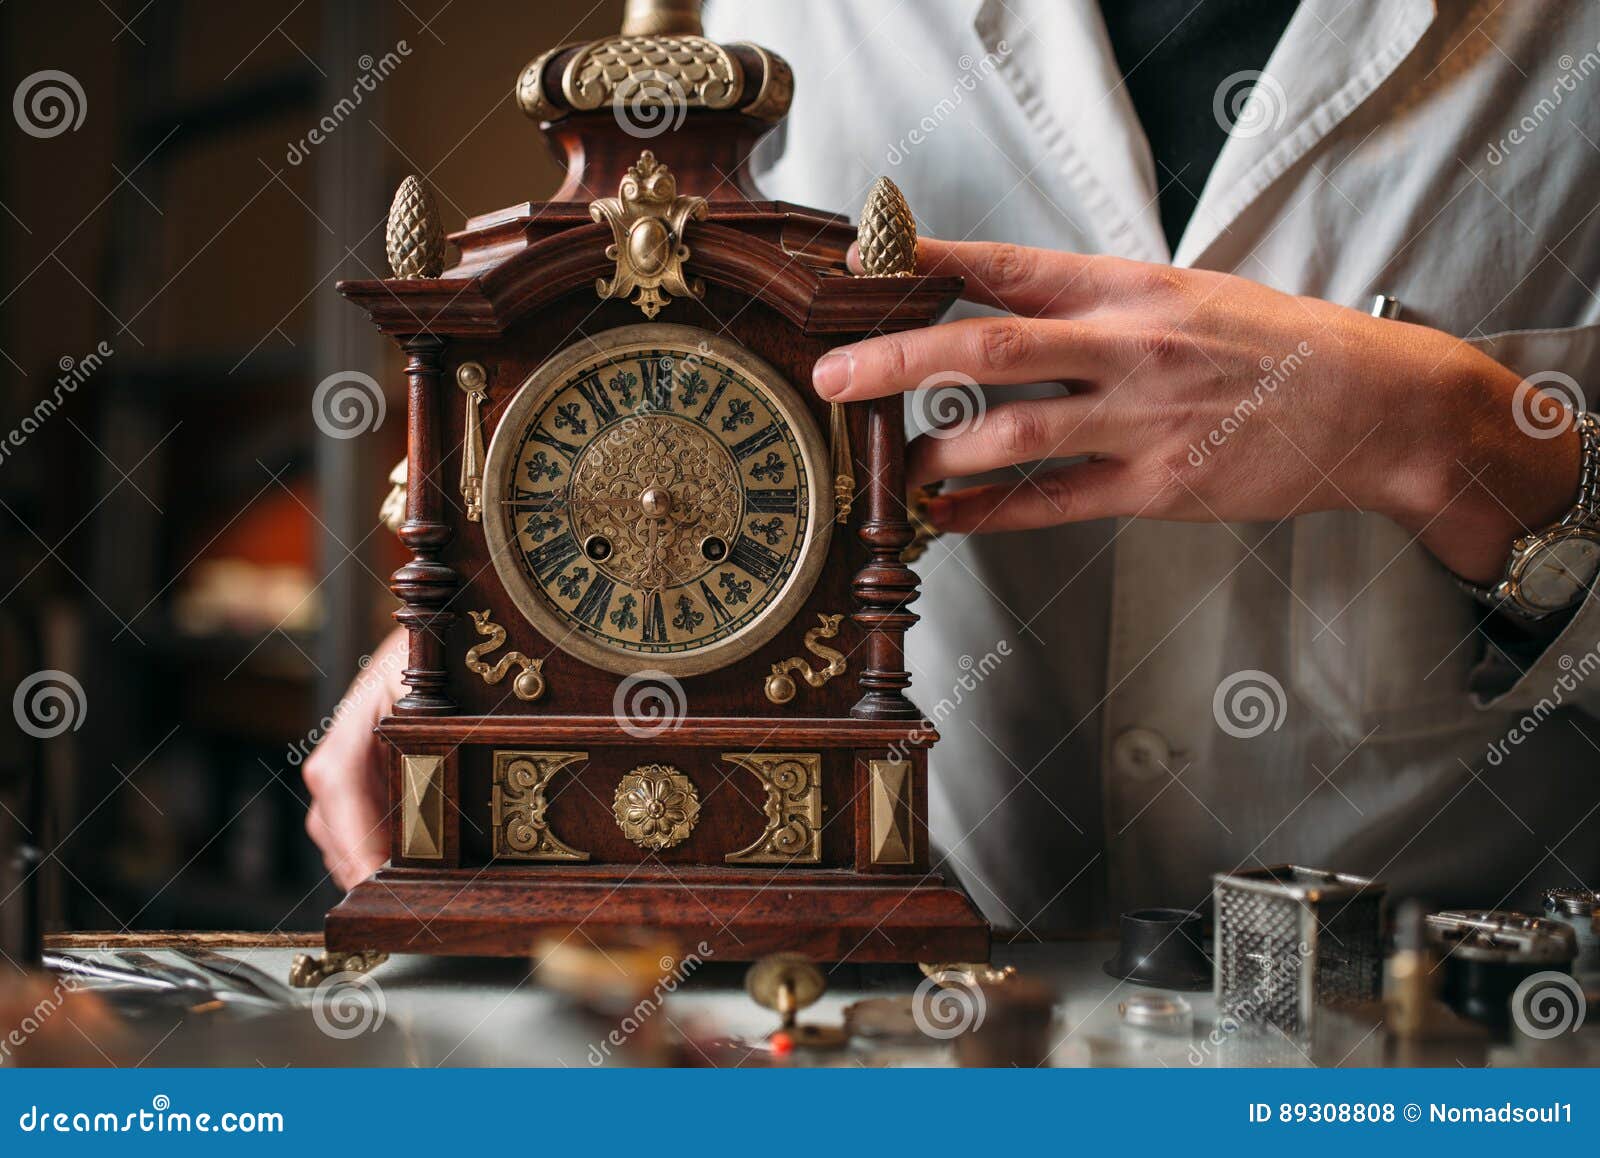 Watchmaker With Old Mechanical Desk Clock Stock Photo Image Of